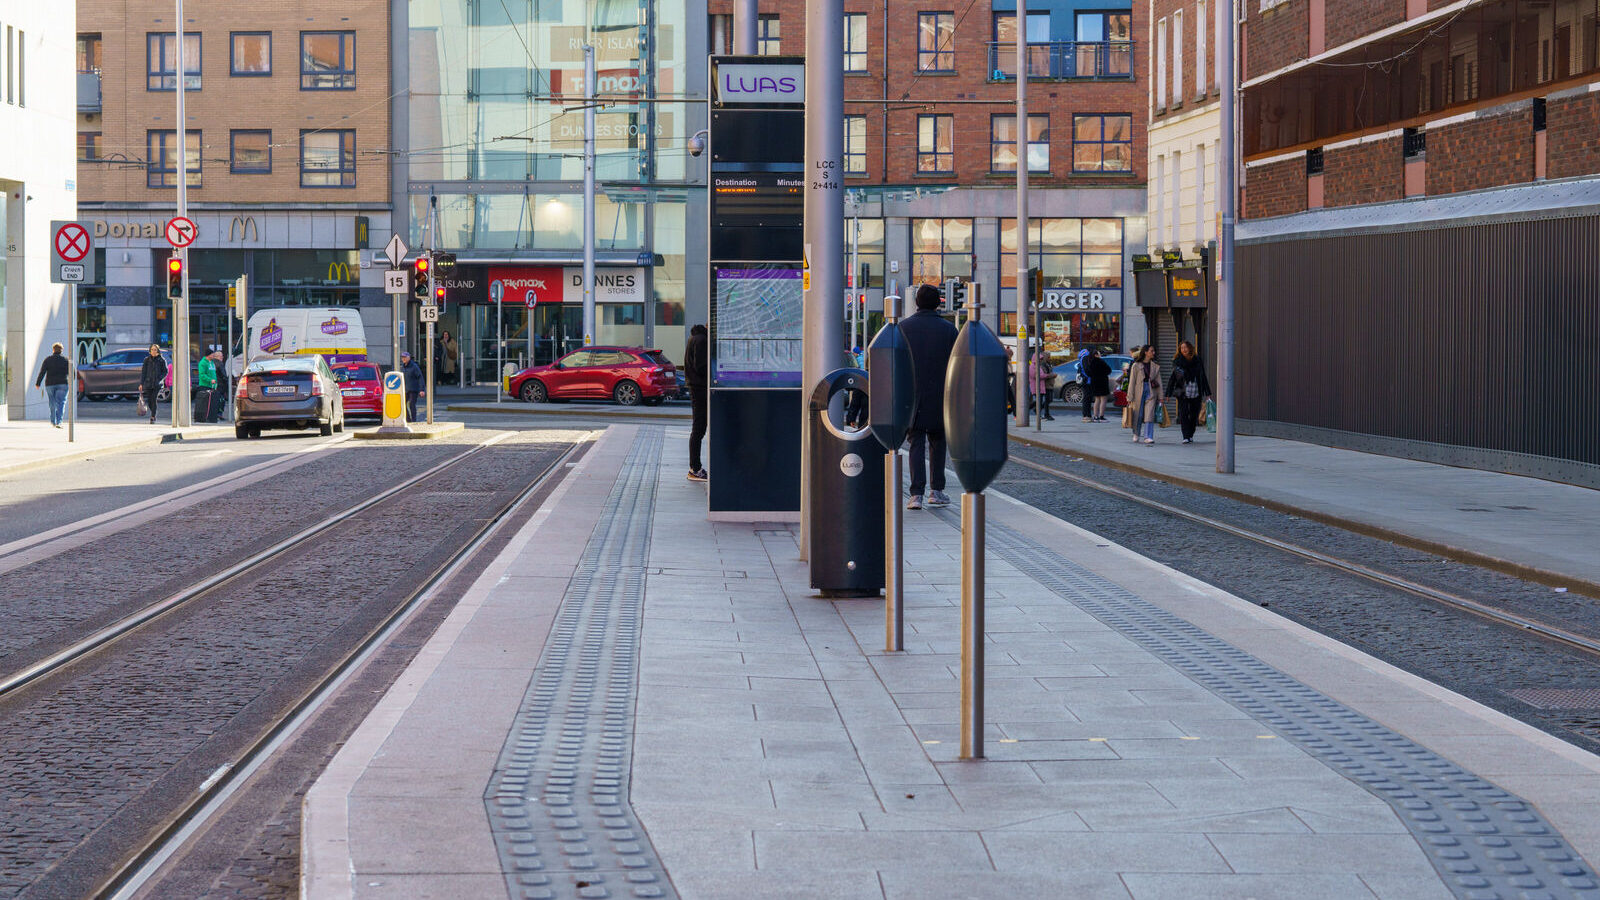 LUAS TRAM STOP AT LOWER DOMINICK STREET [AT THE MOMENT THE AREA DOES FEEL SAFER]-228693-1